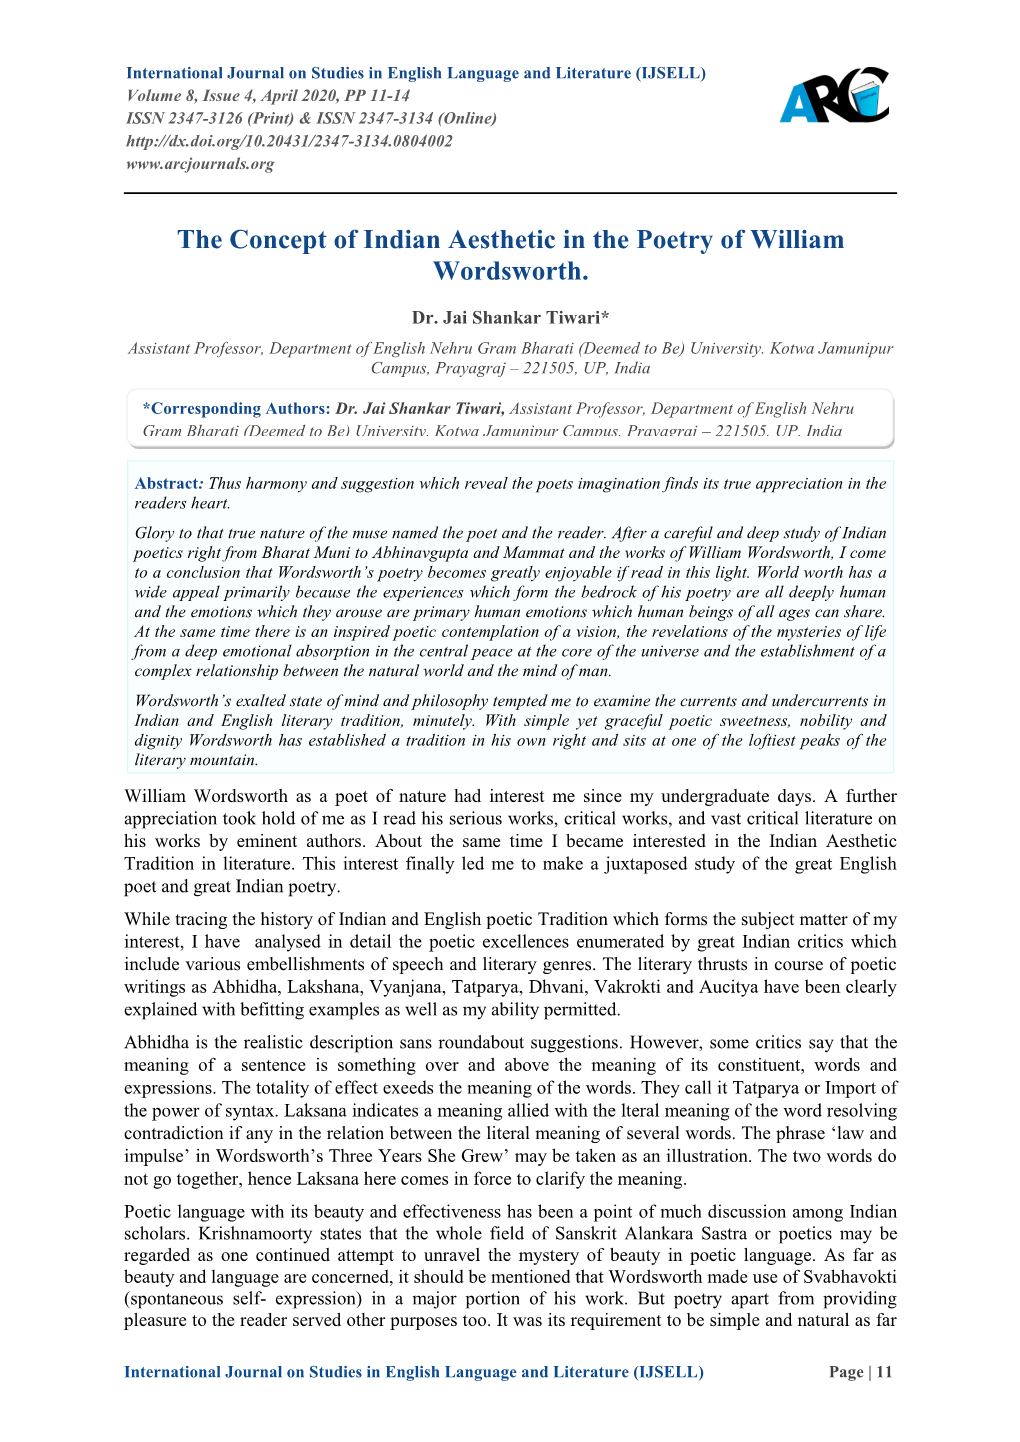 The Concept of Indian Aesthetic in the Poetry of William Wordsworth